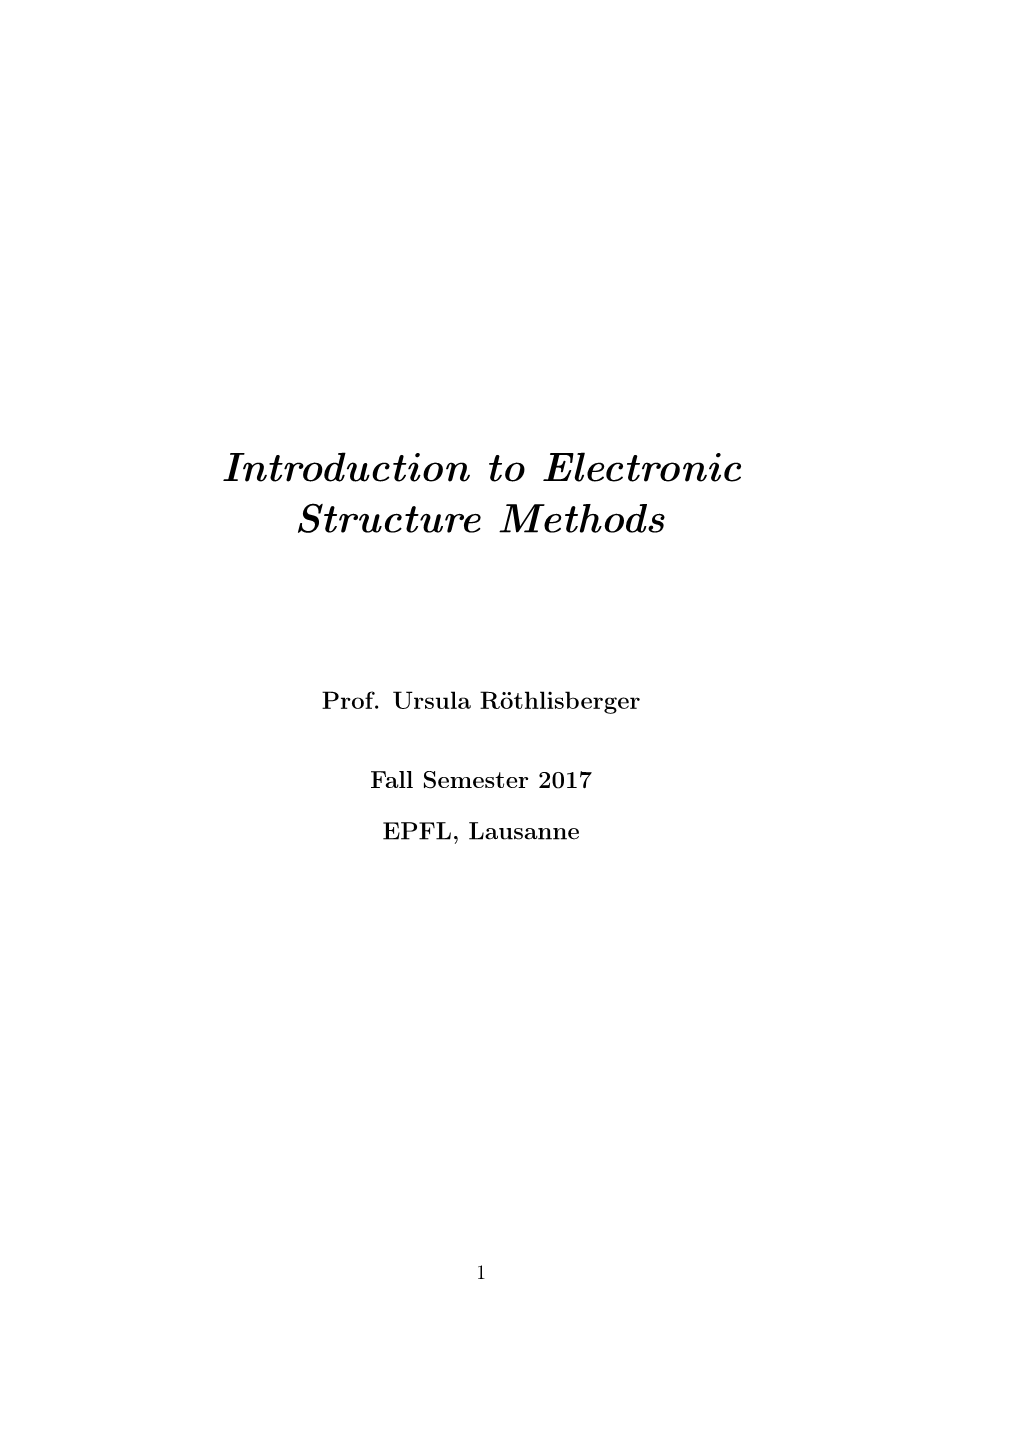 Introduction to Electronic Structure Methods